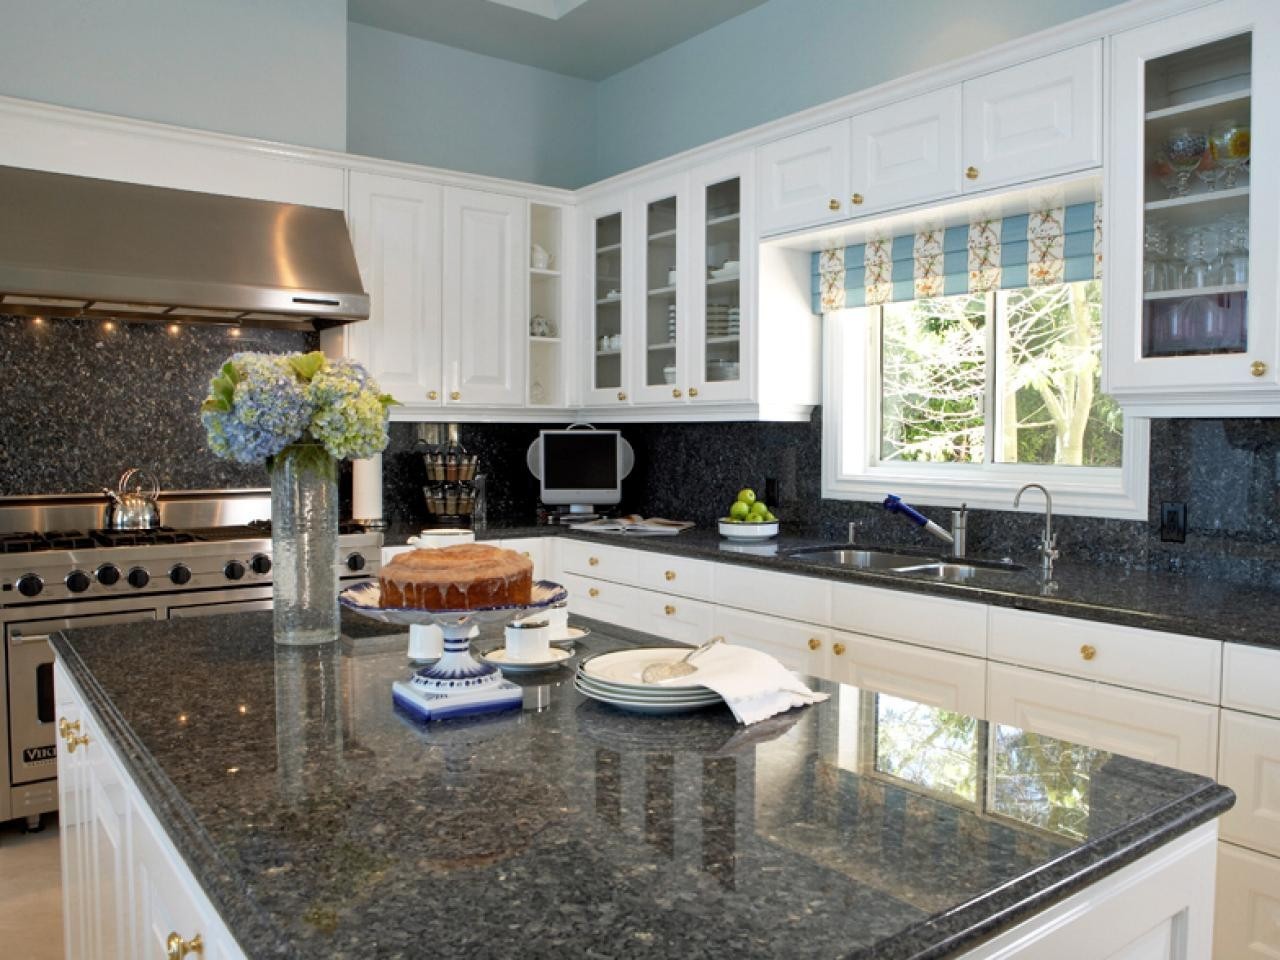 How You Can Easily Install Granite Countertops In Your Kitchen